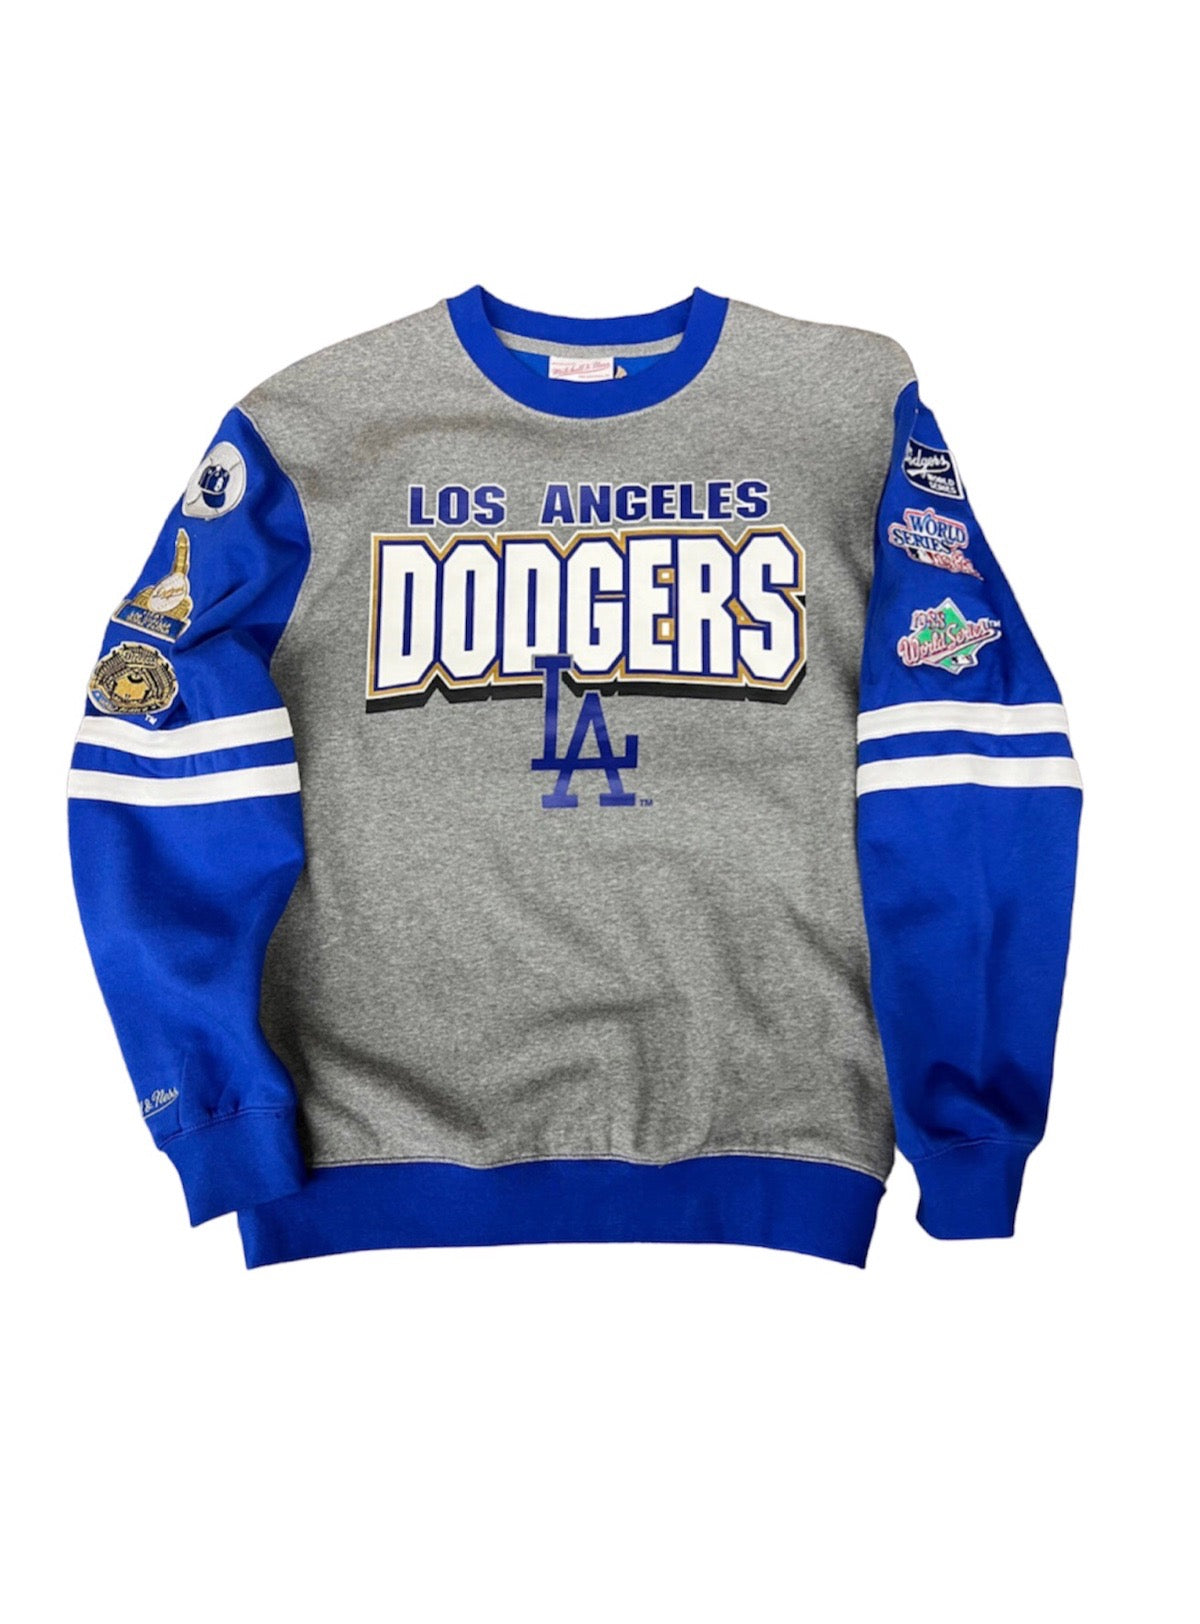 Mitchell & Ness Sweatshirt - All Over Crew 2.0 - La Dodgers - Grey and Dodger Blue - FCPO3400 M